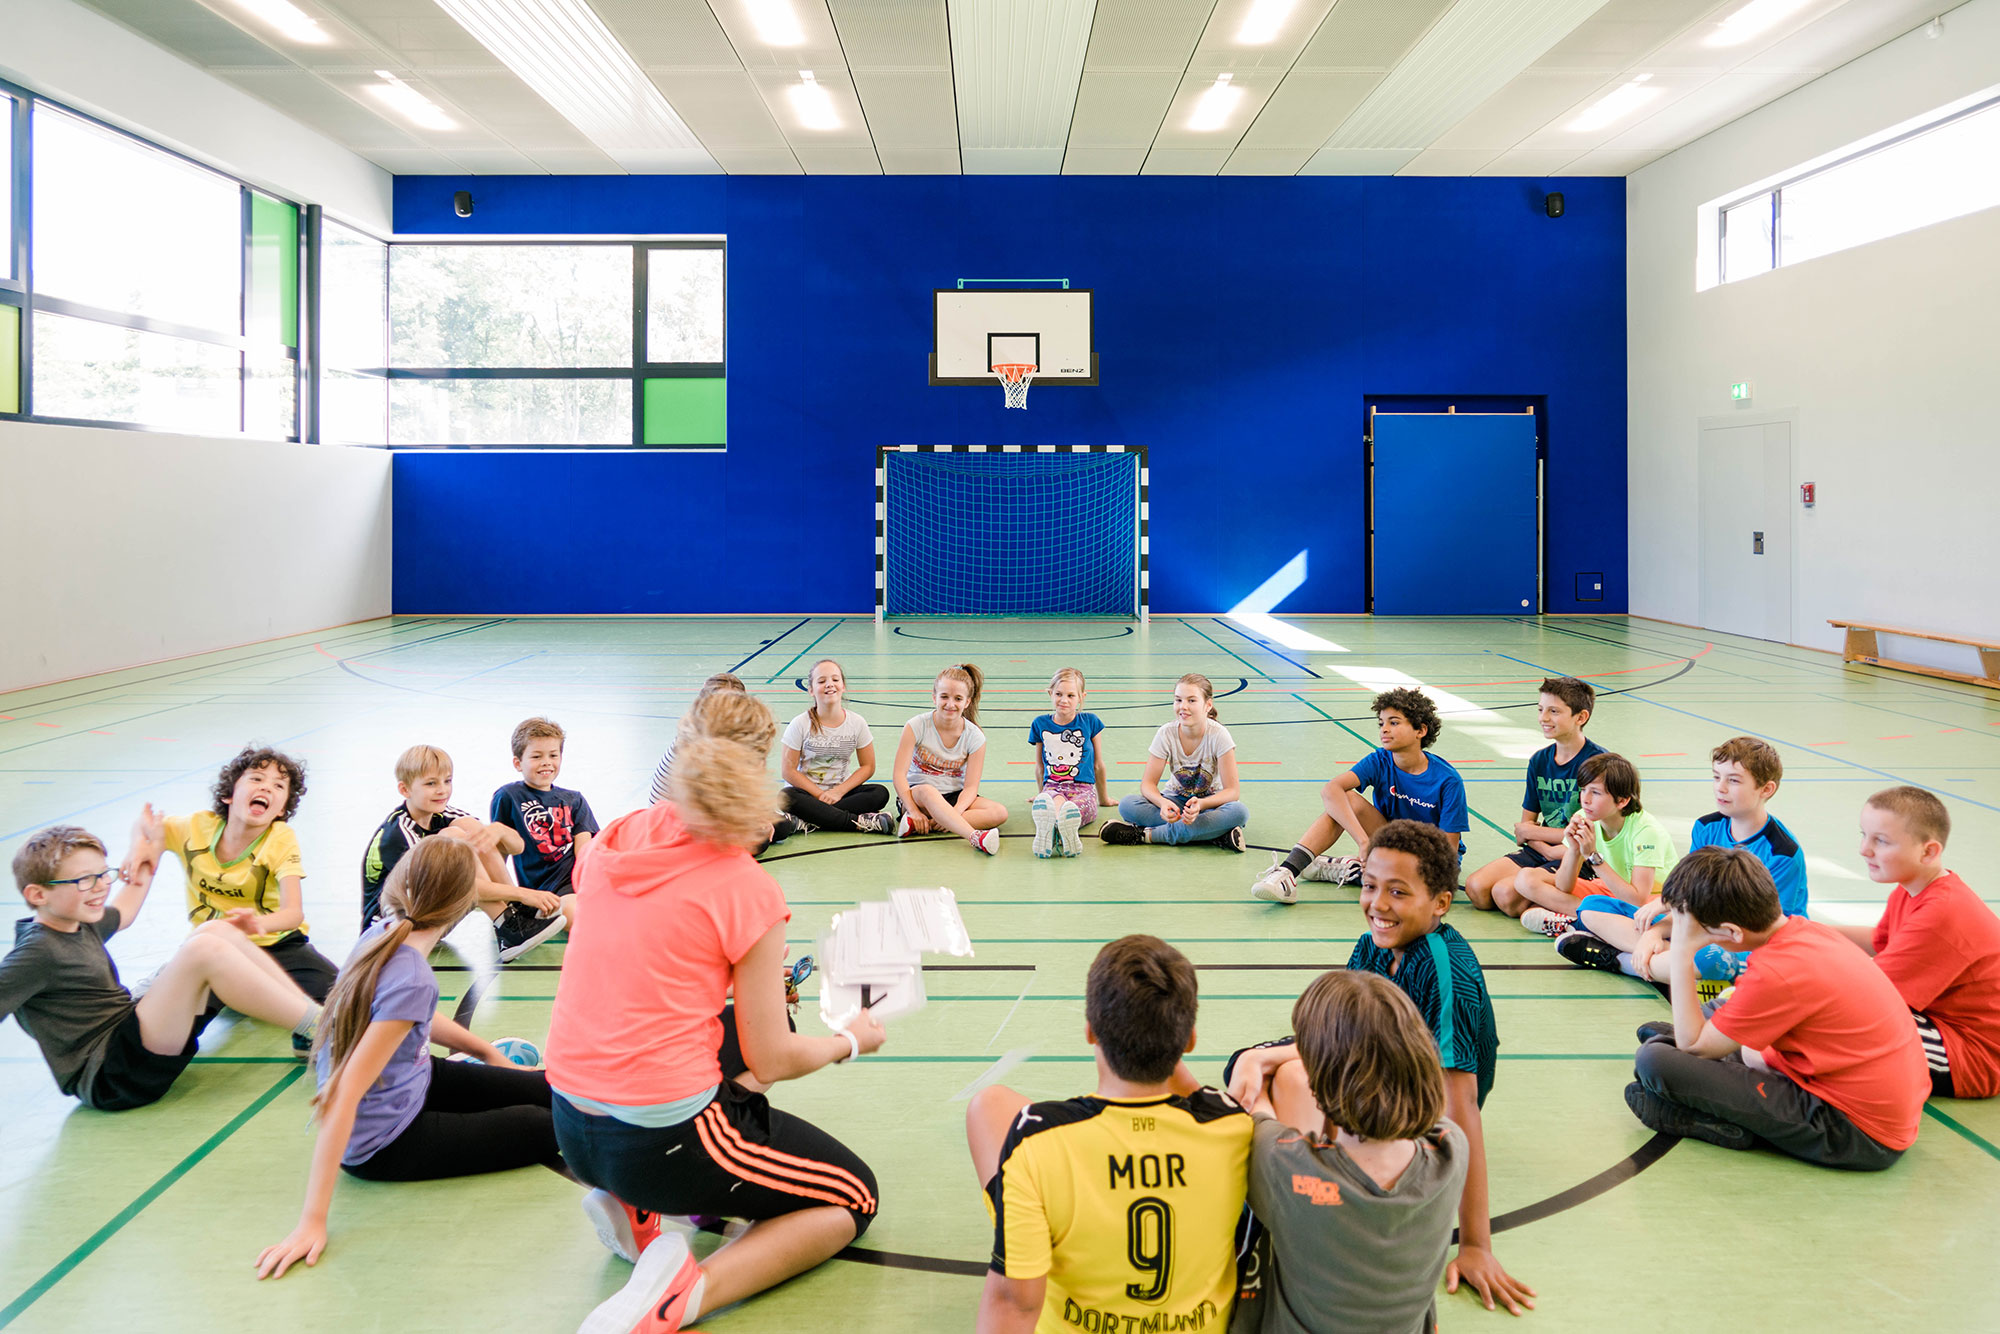 In a modern gymnasium, a sports teacher gathers her students seated in a circle and gives instructions.	